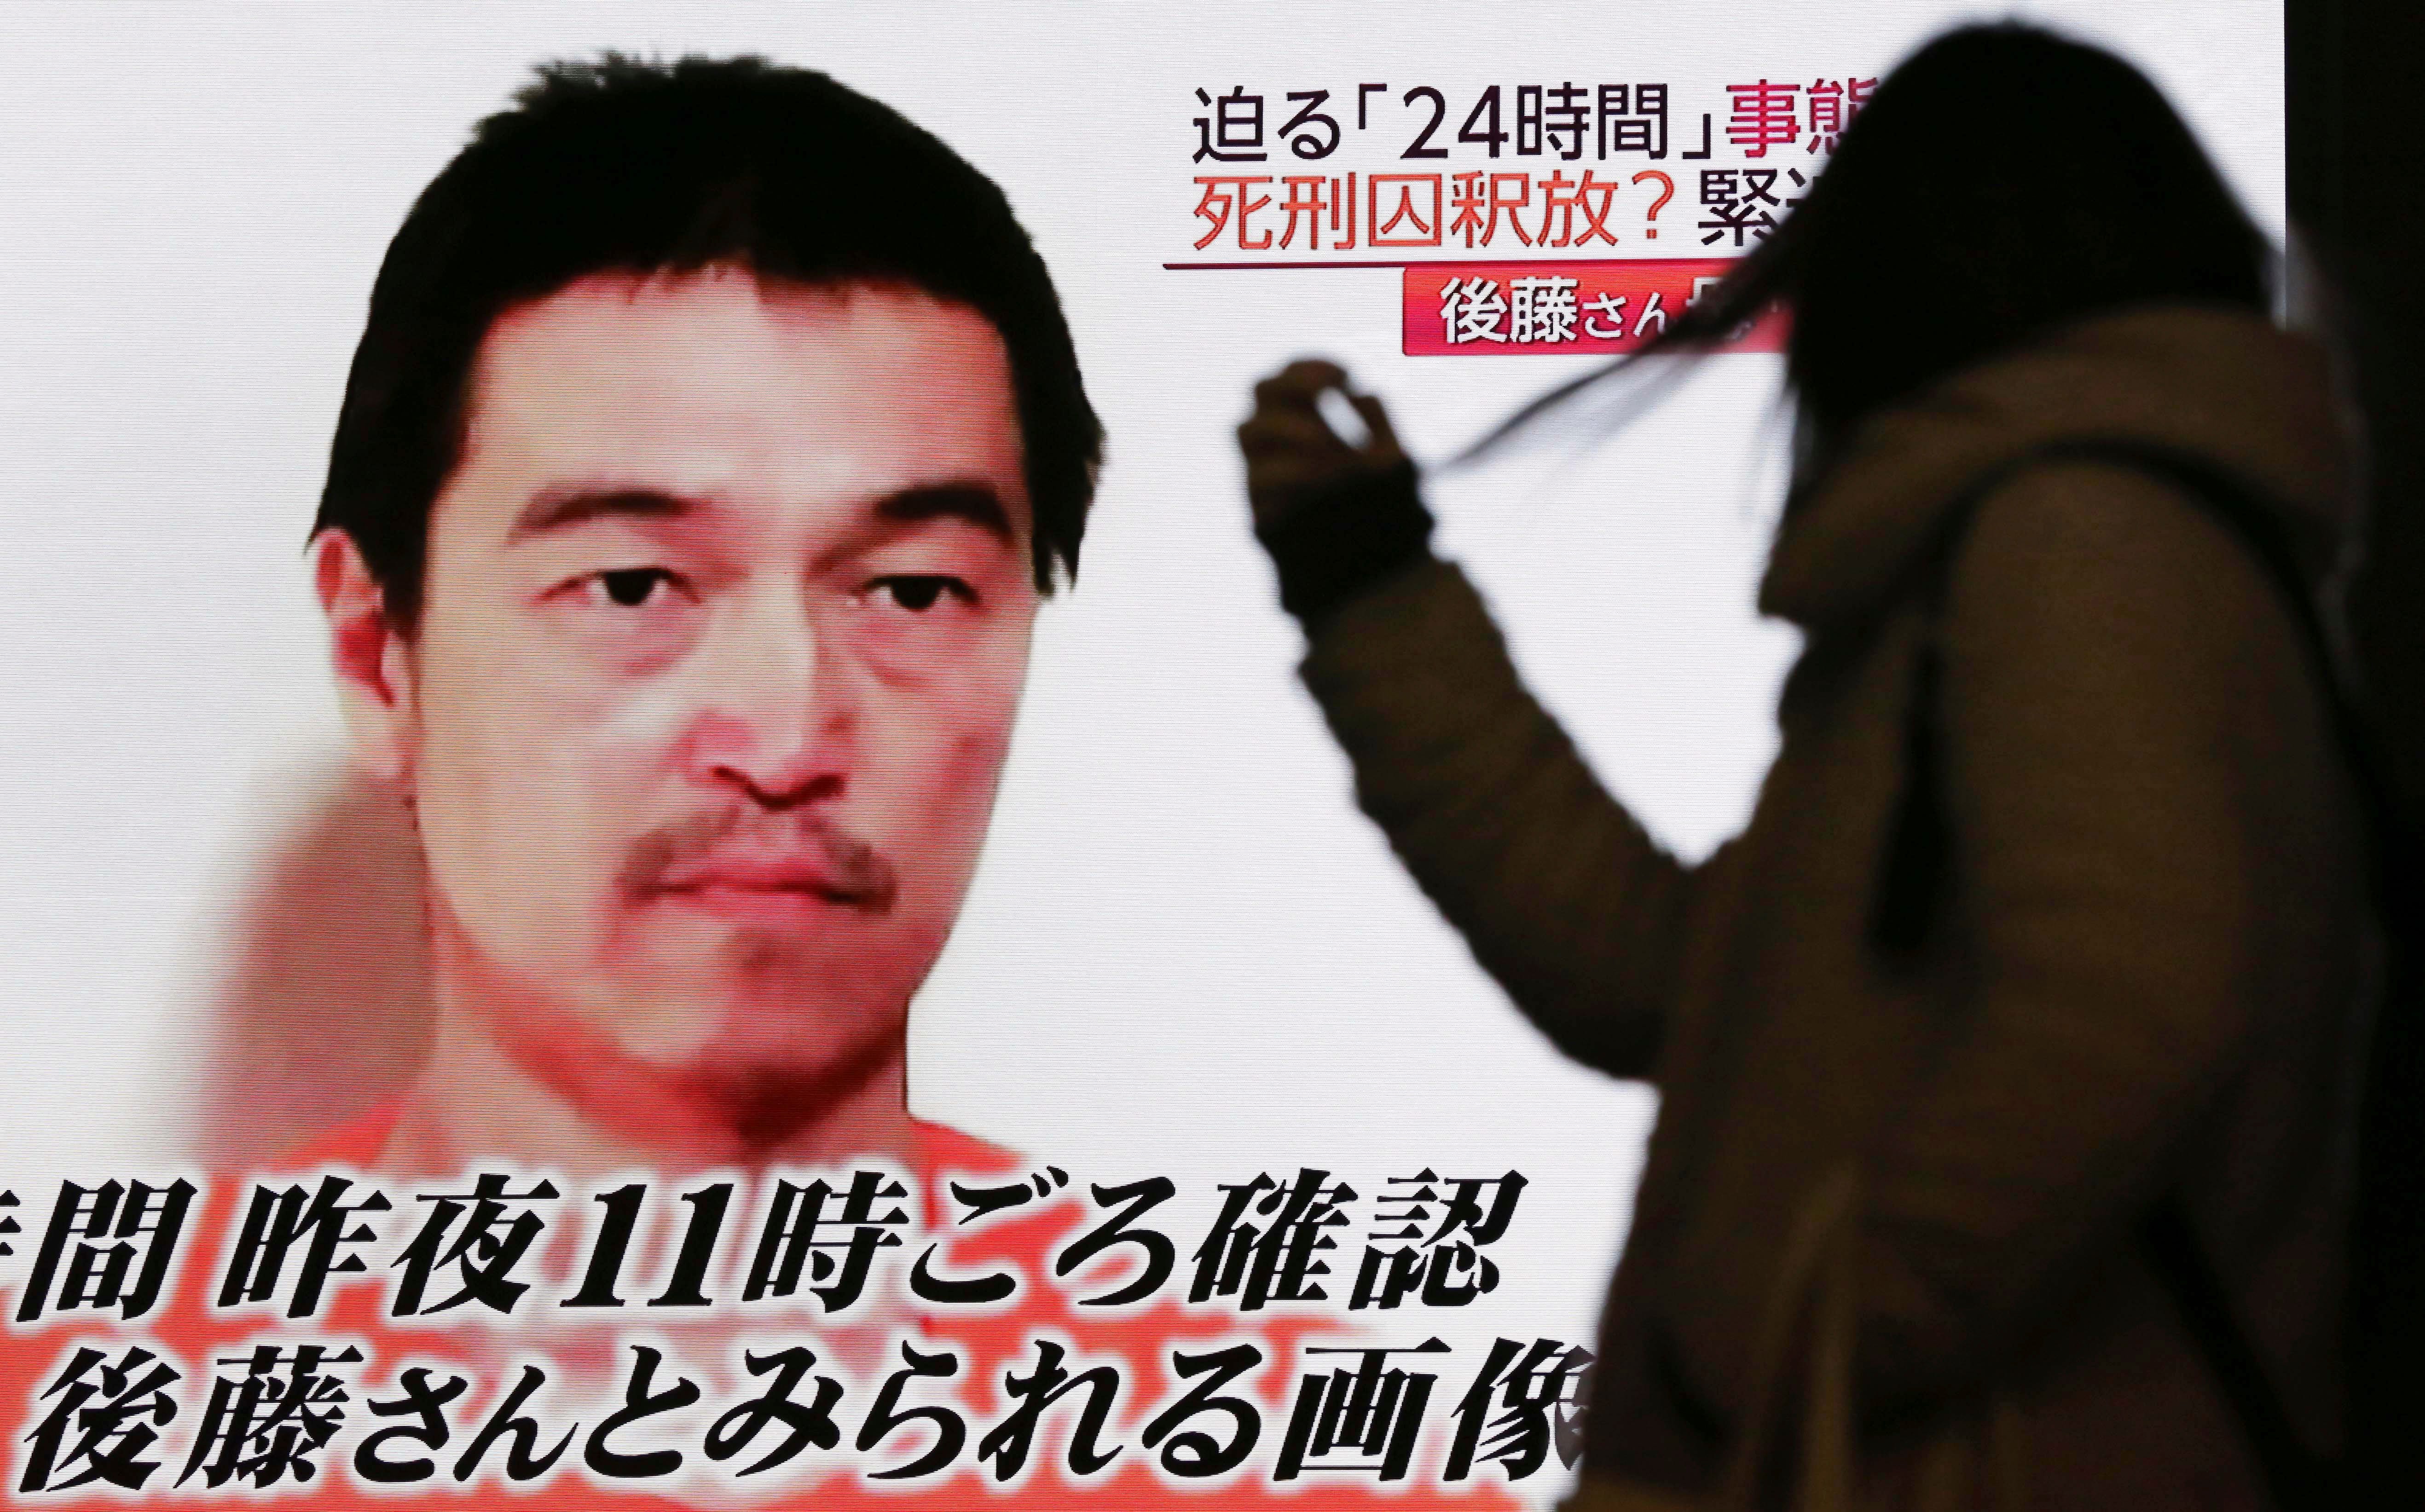 Japan officials work feverishly to secure ISIL hostages release